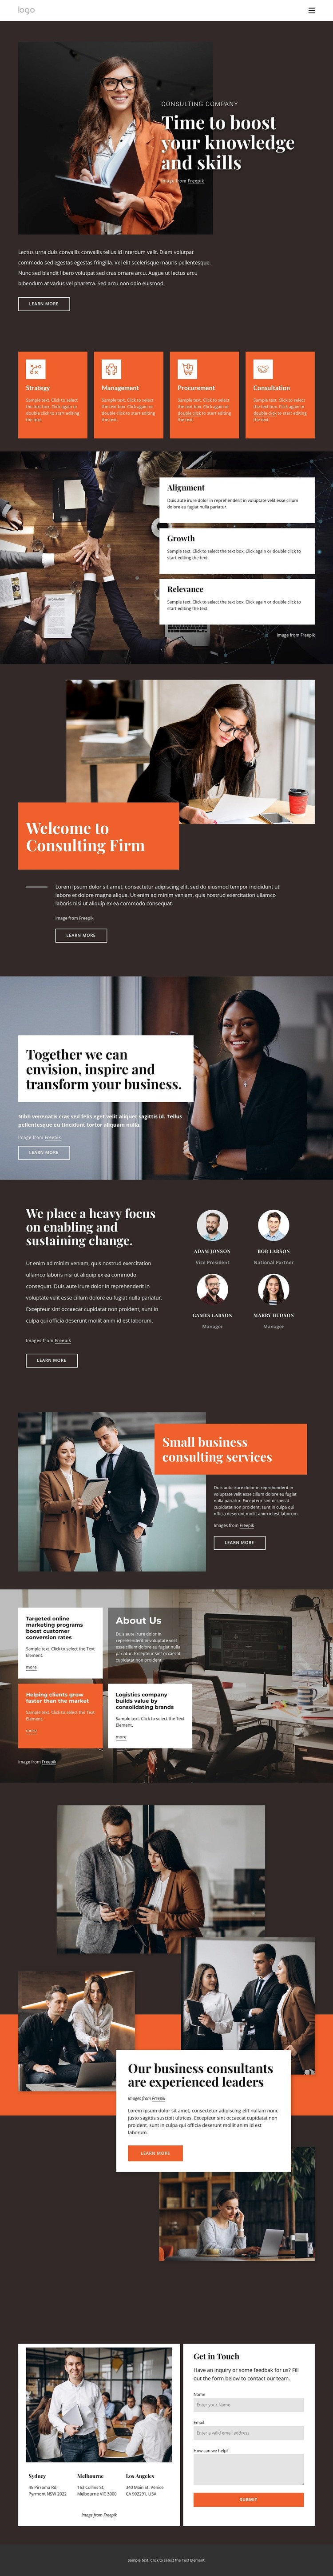 Рlan out your learning journey WordPress Theme